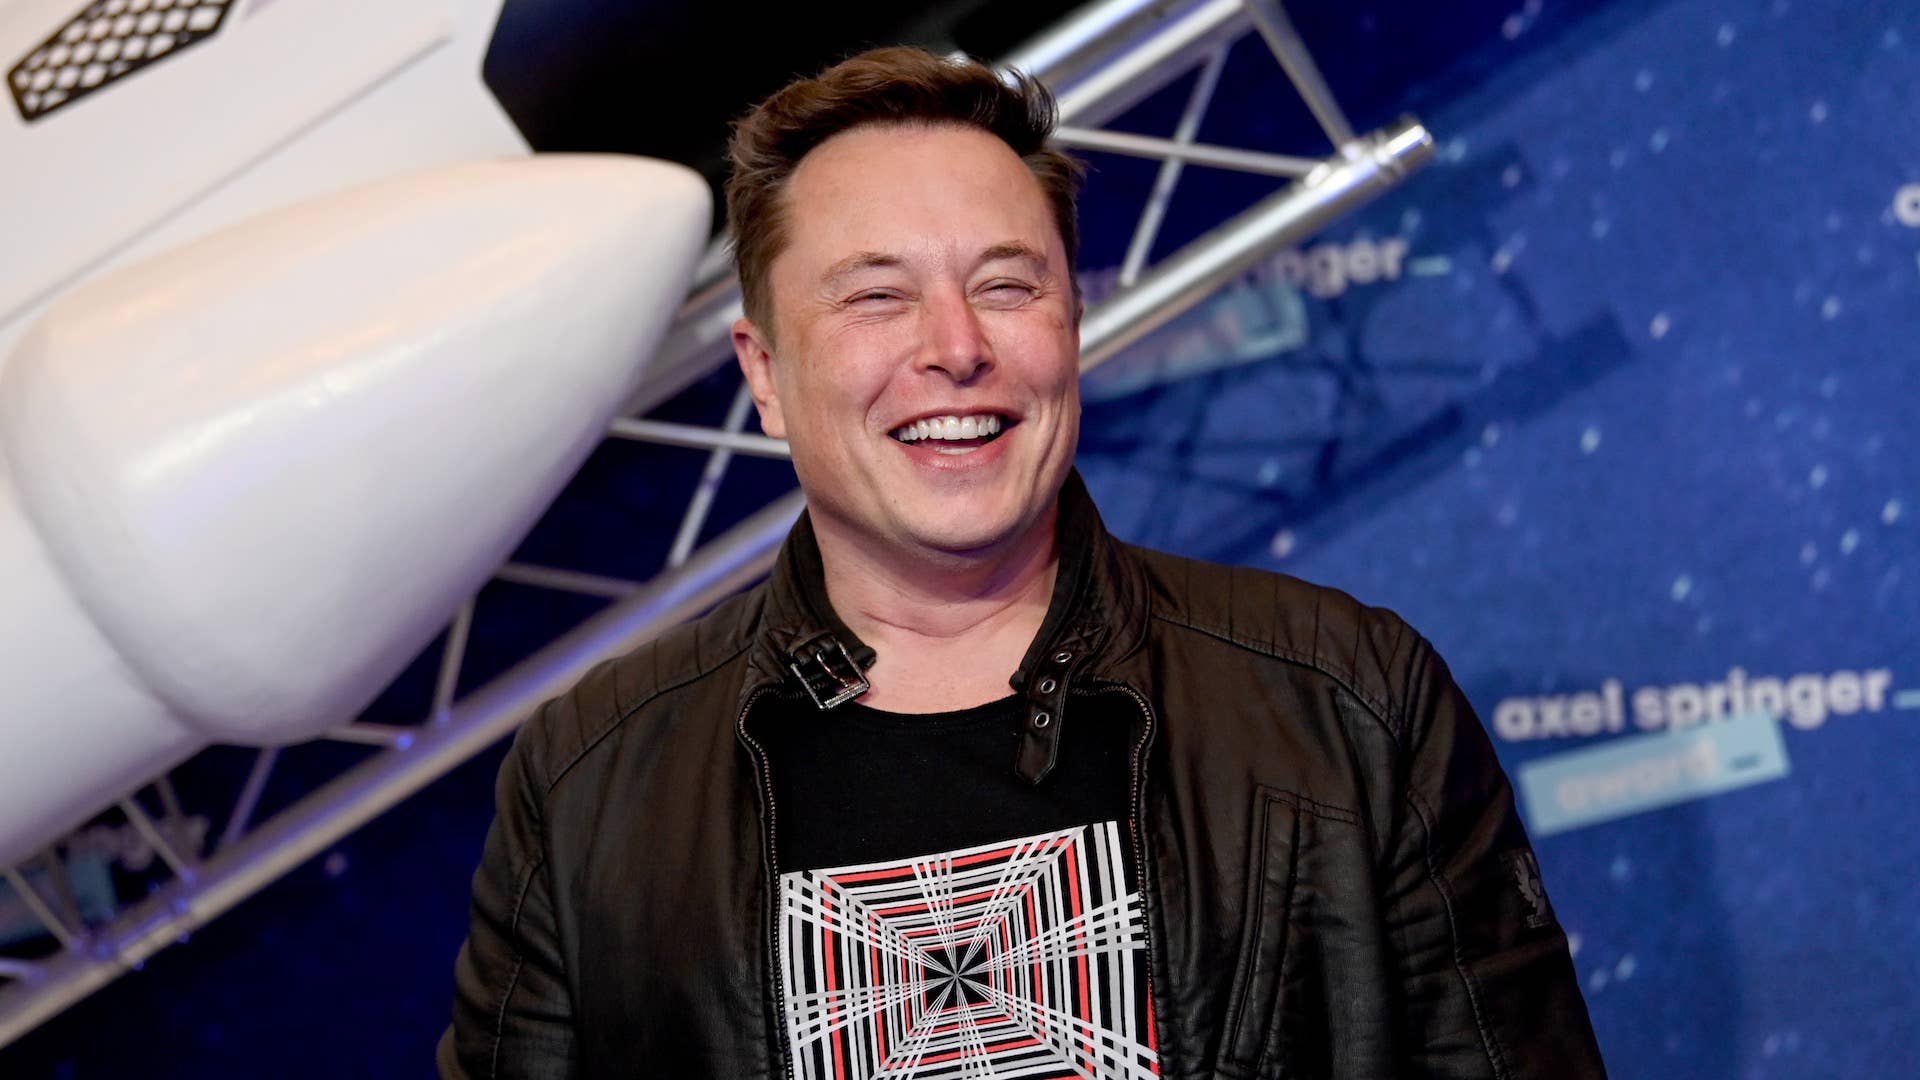 SpaceX owner and Tesla CEO Elon Musk poses on the red carpet